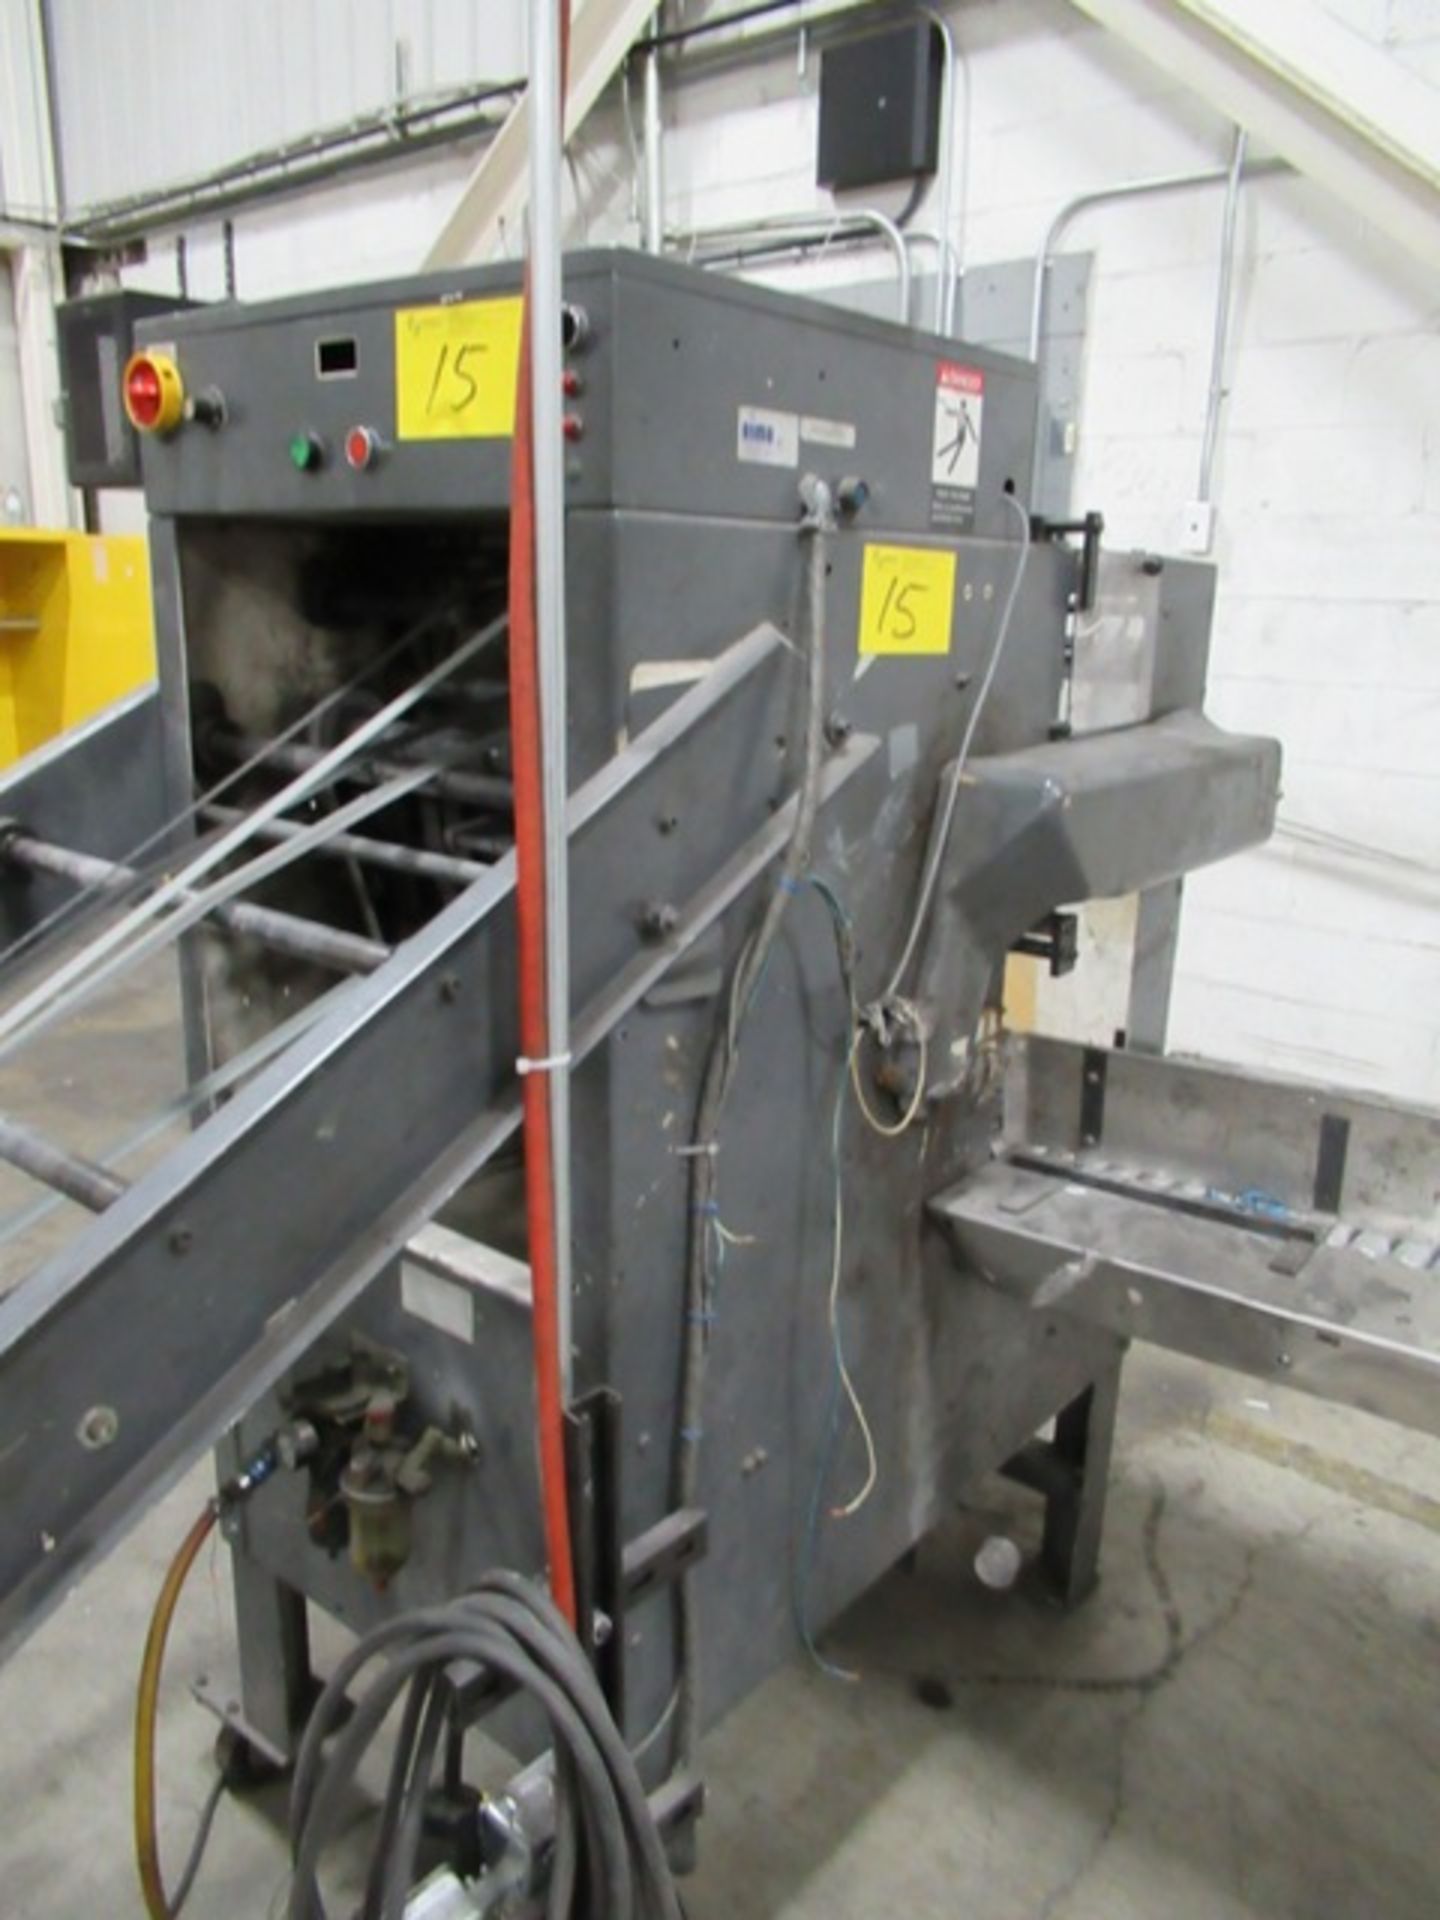 MAIL INSPECTION ASSEMBLY LINE W/RIMA RS-10 STACKER, S/N 816, POWERBELT 12" X 8' POWERED BELT - Image 3 of 4